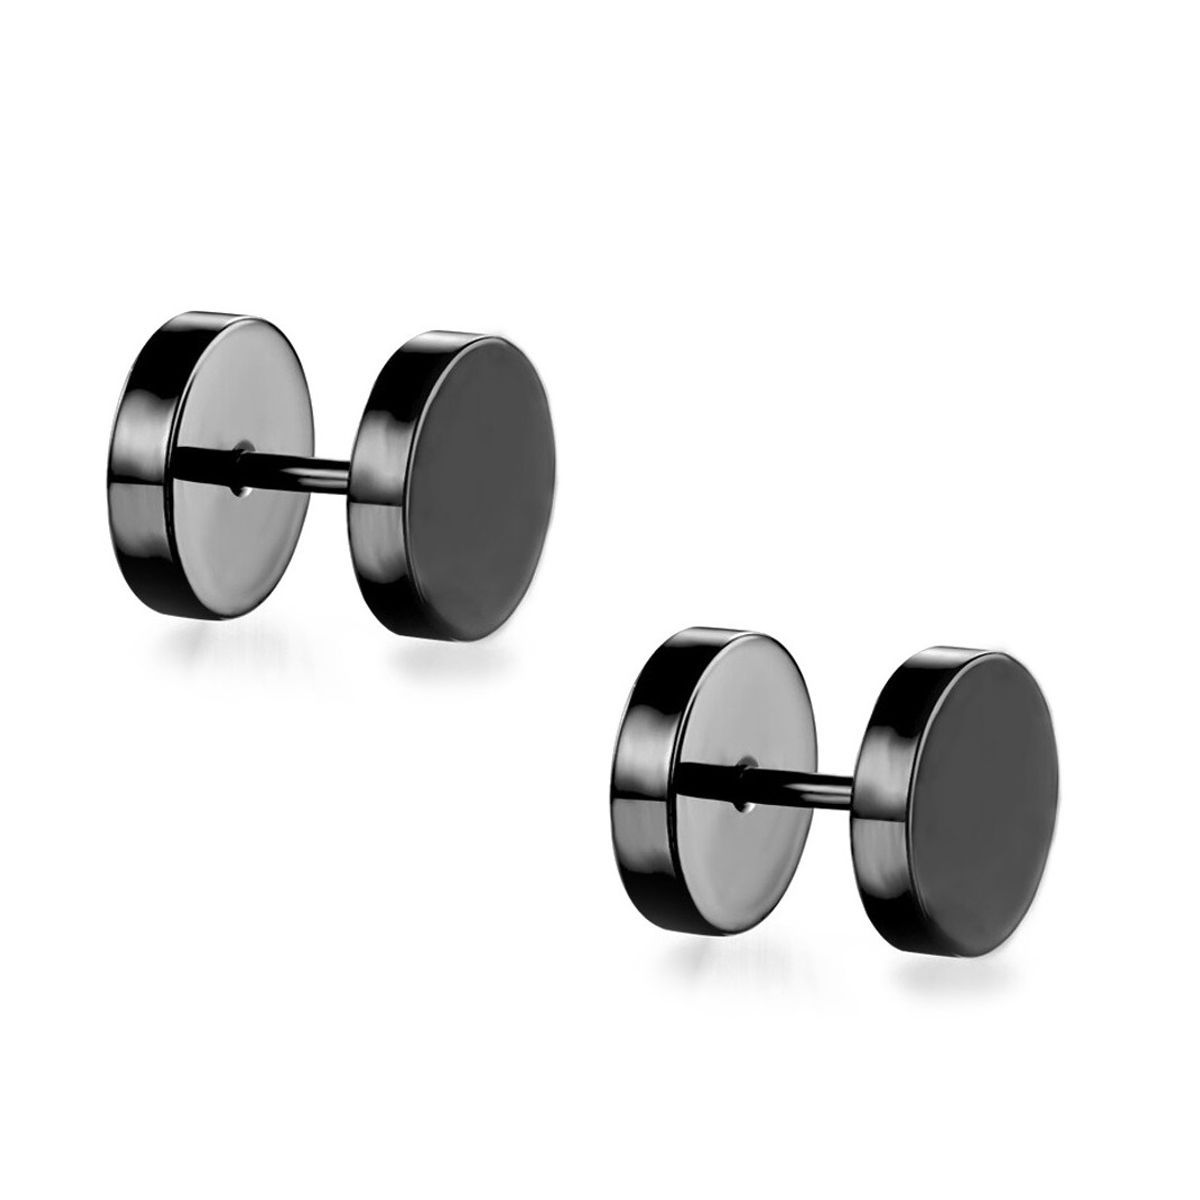 Pair of Black Stainless Steel Barbell Shaped Studs